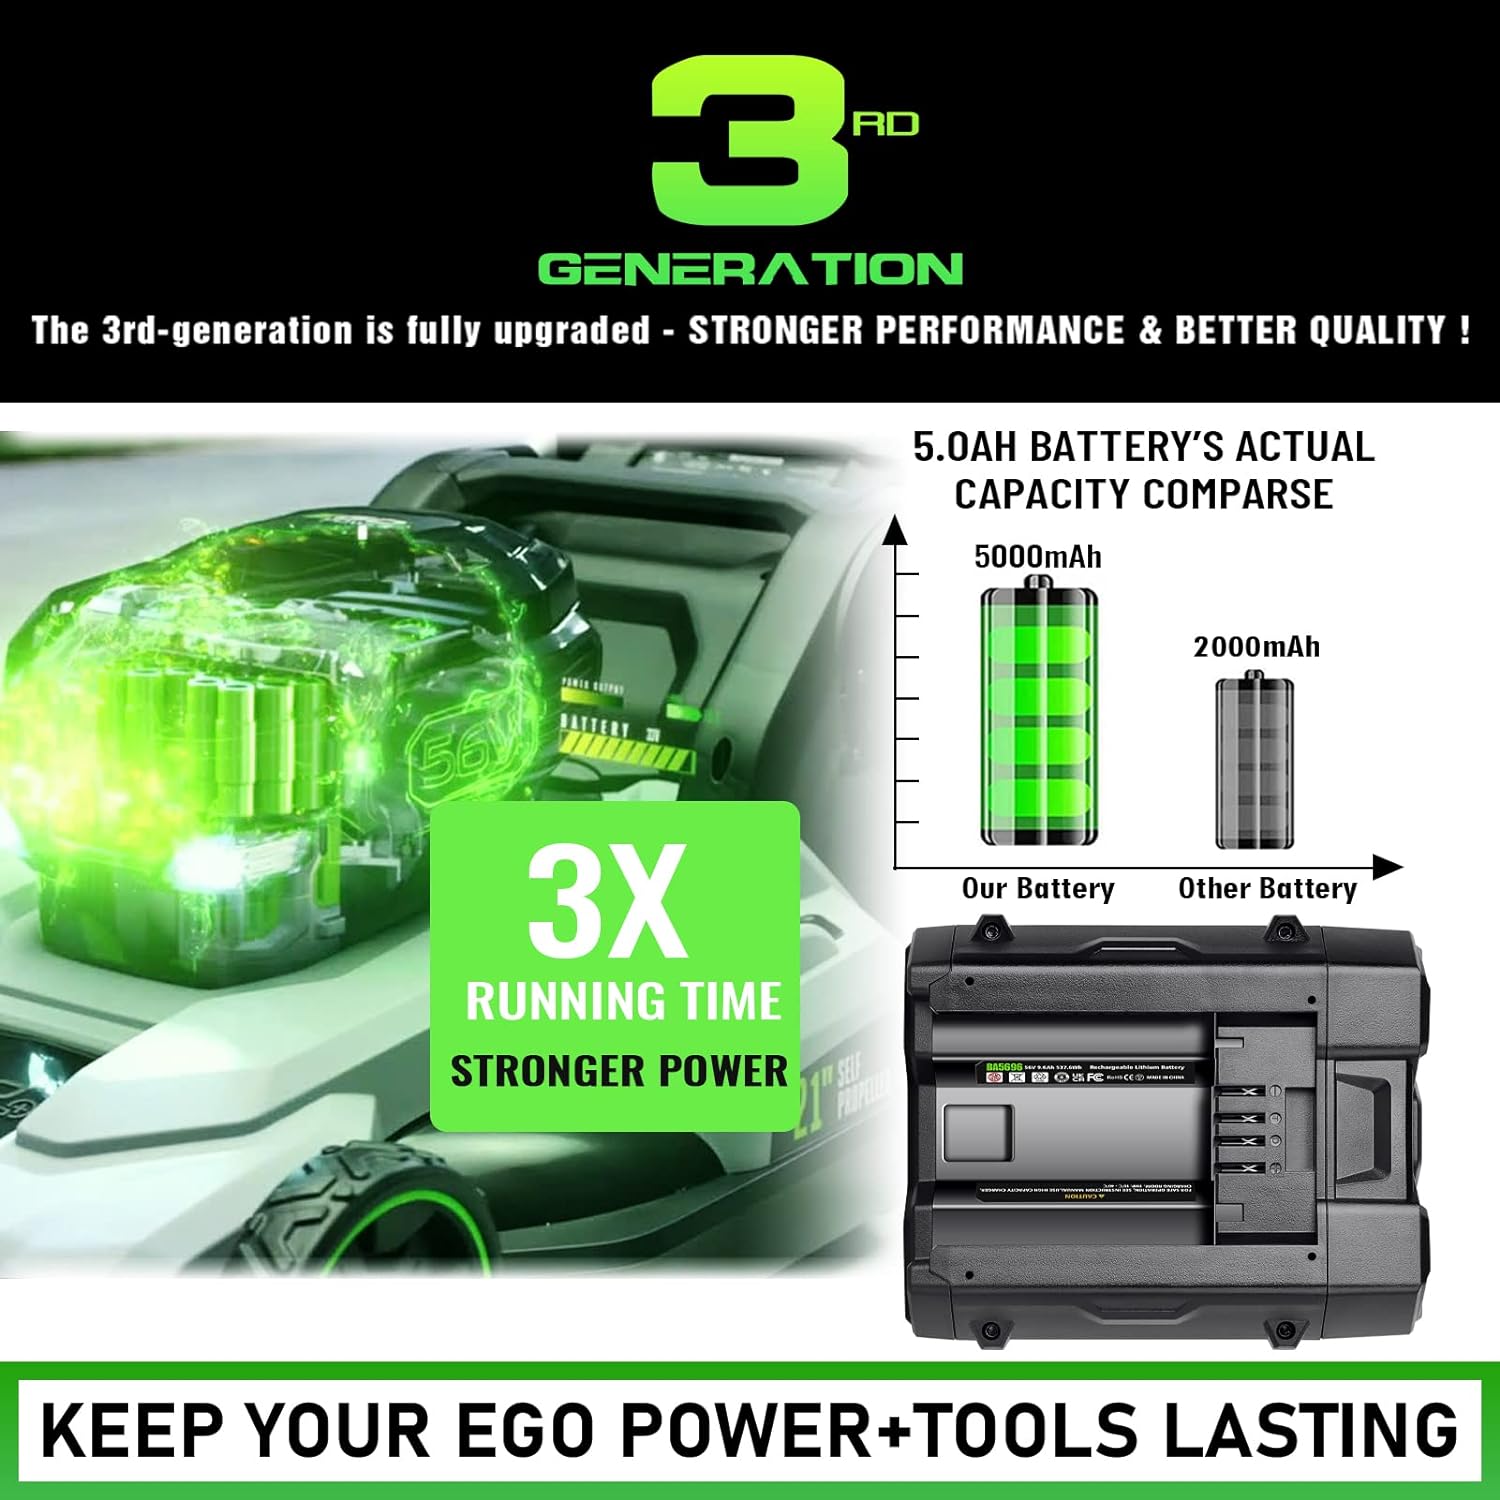 CaliHutt 【3rd-Generation Lion!】 56V 5.0Ah Replace Battery for EGO Power+ BA1400T Battery Lithium Ion Battery Compatible with 56V Power Tools CS1604 CS1804 CS1403 HT2400 Tools